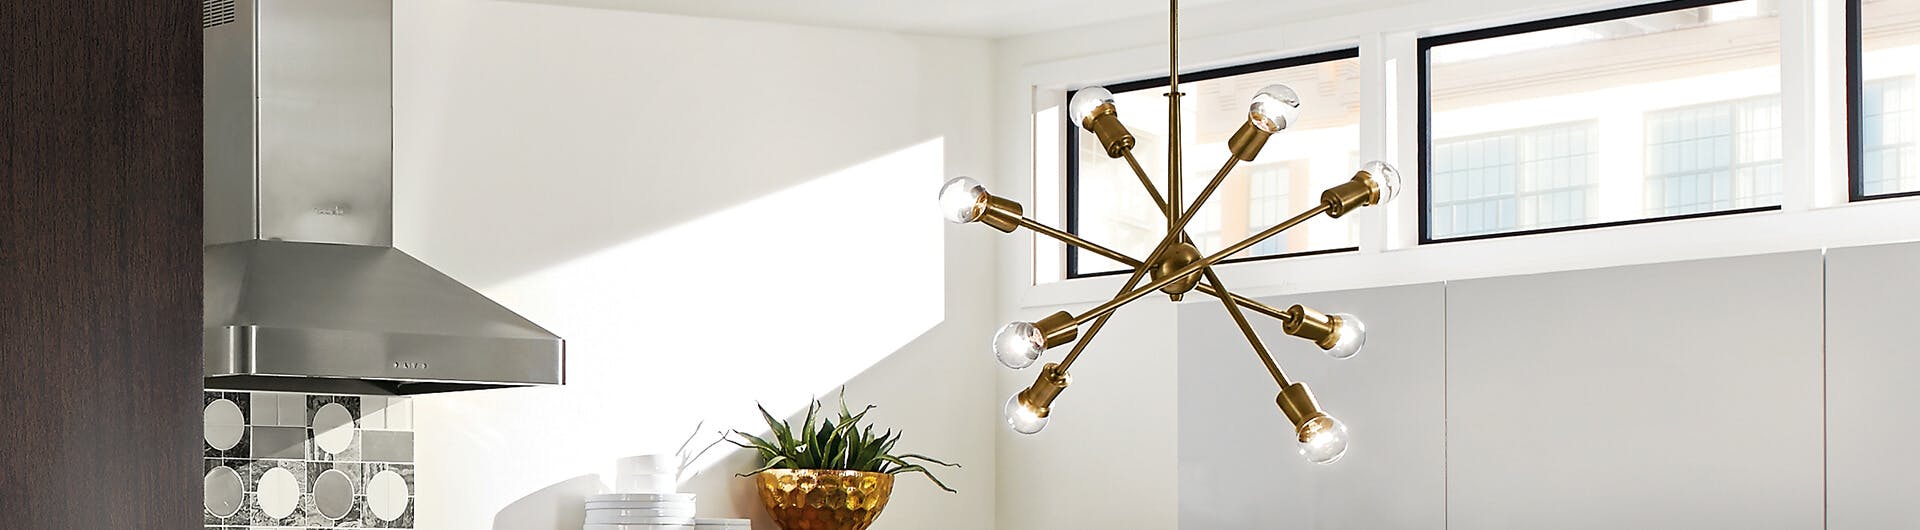 Gold finish Armstrong chandelier hanging in a modern white kitchen